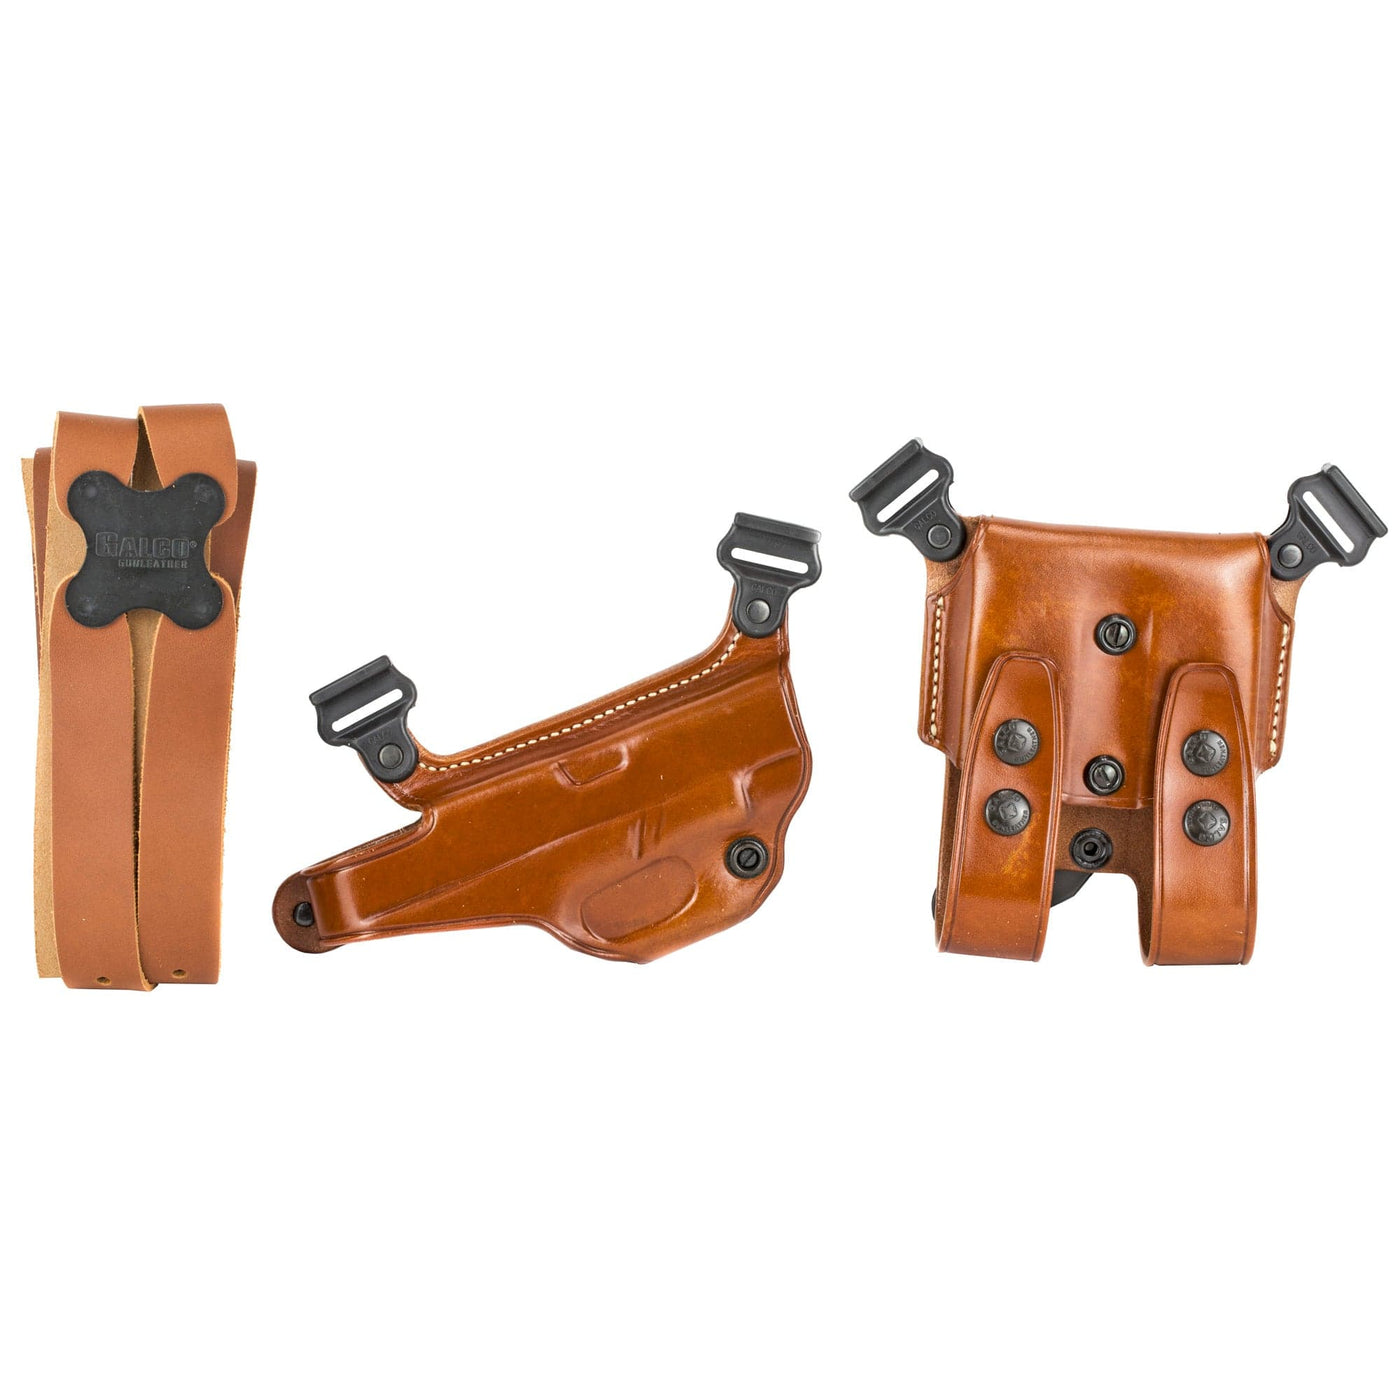 Galco Galco Miami Shoulder System - Rh Leather Glock 202137 Tan Holsters And Related Items